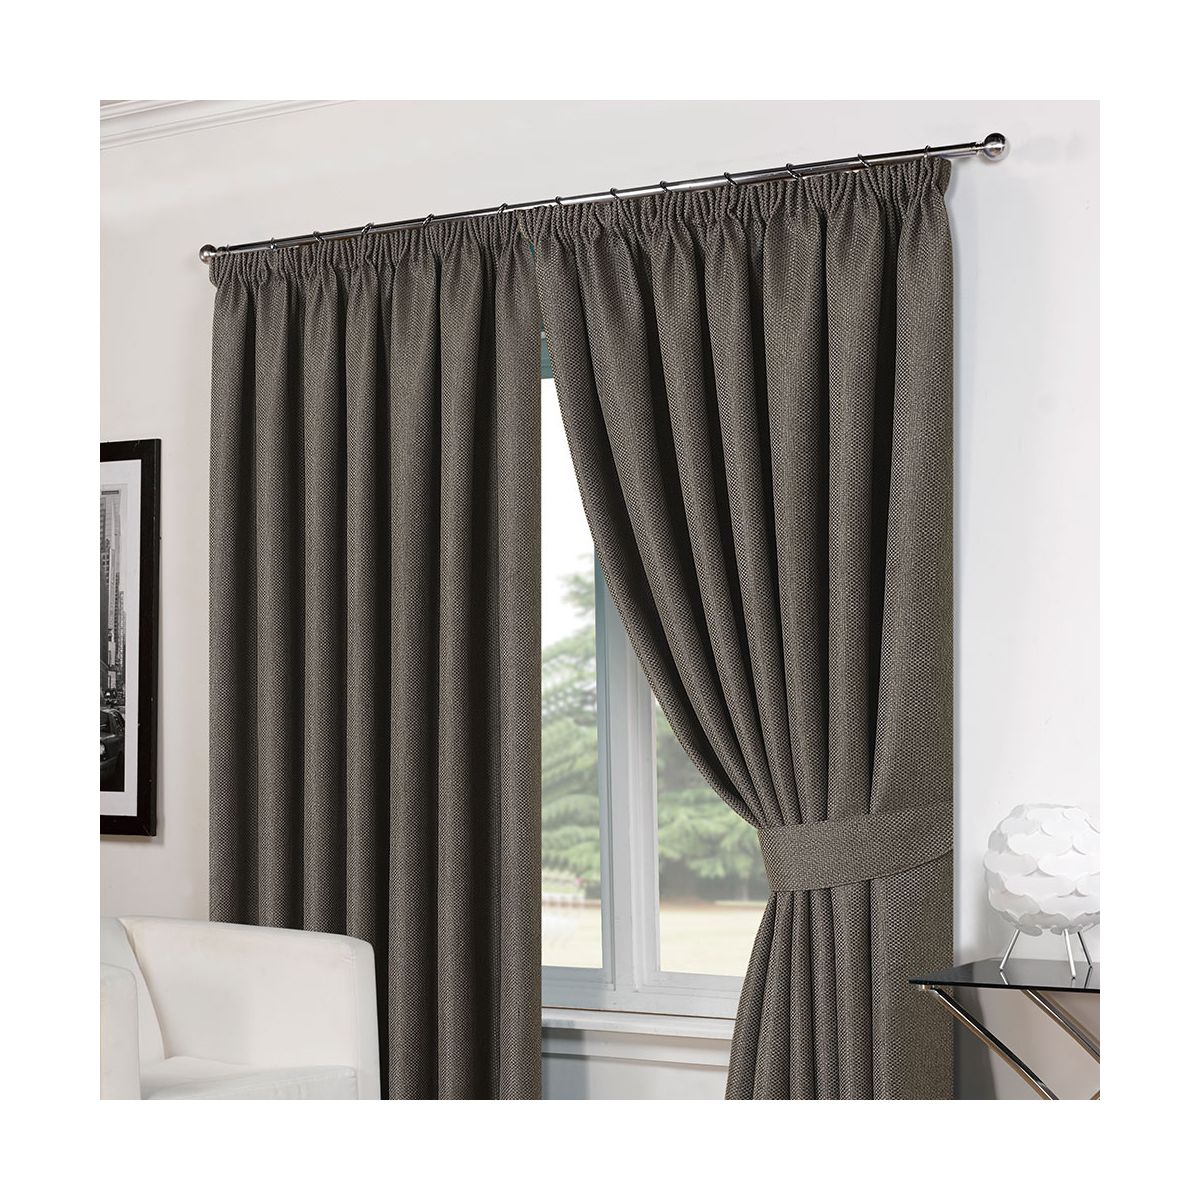 Basket Weave Tape Top Curtains With Tiebacks - Charcoal 66x54